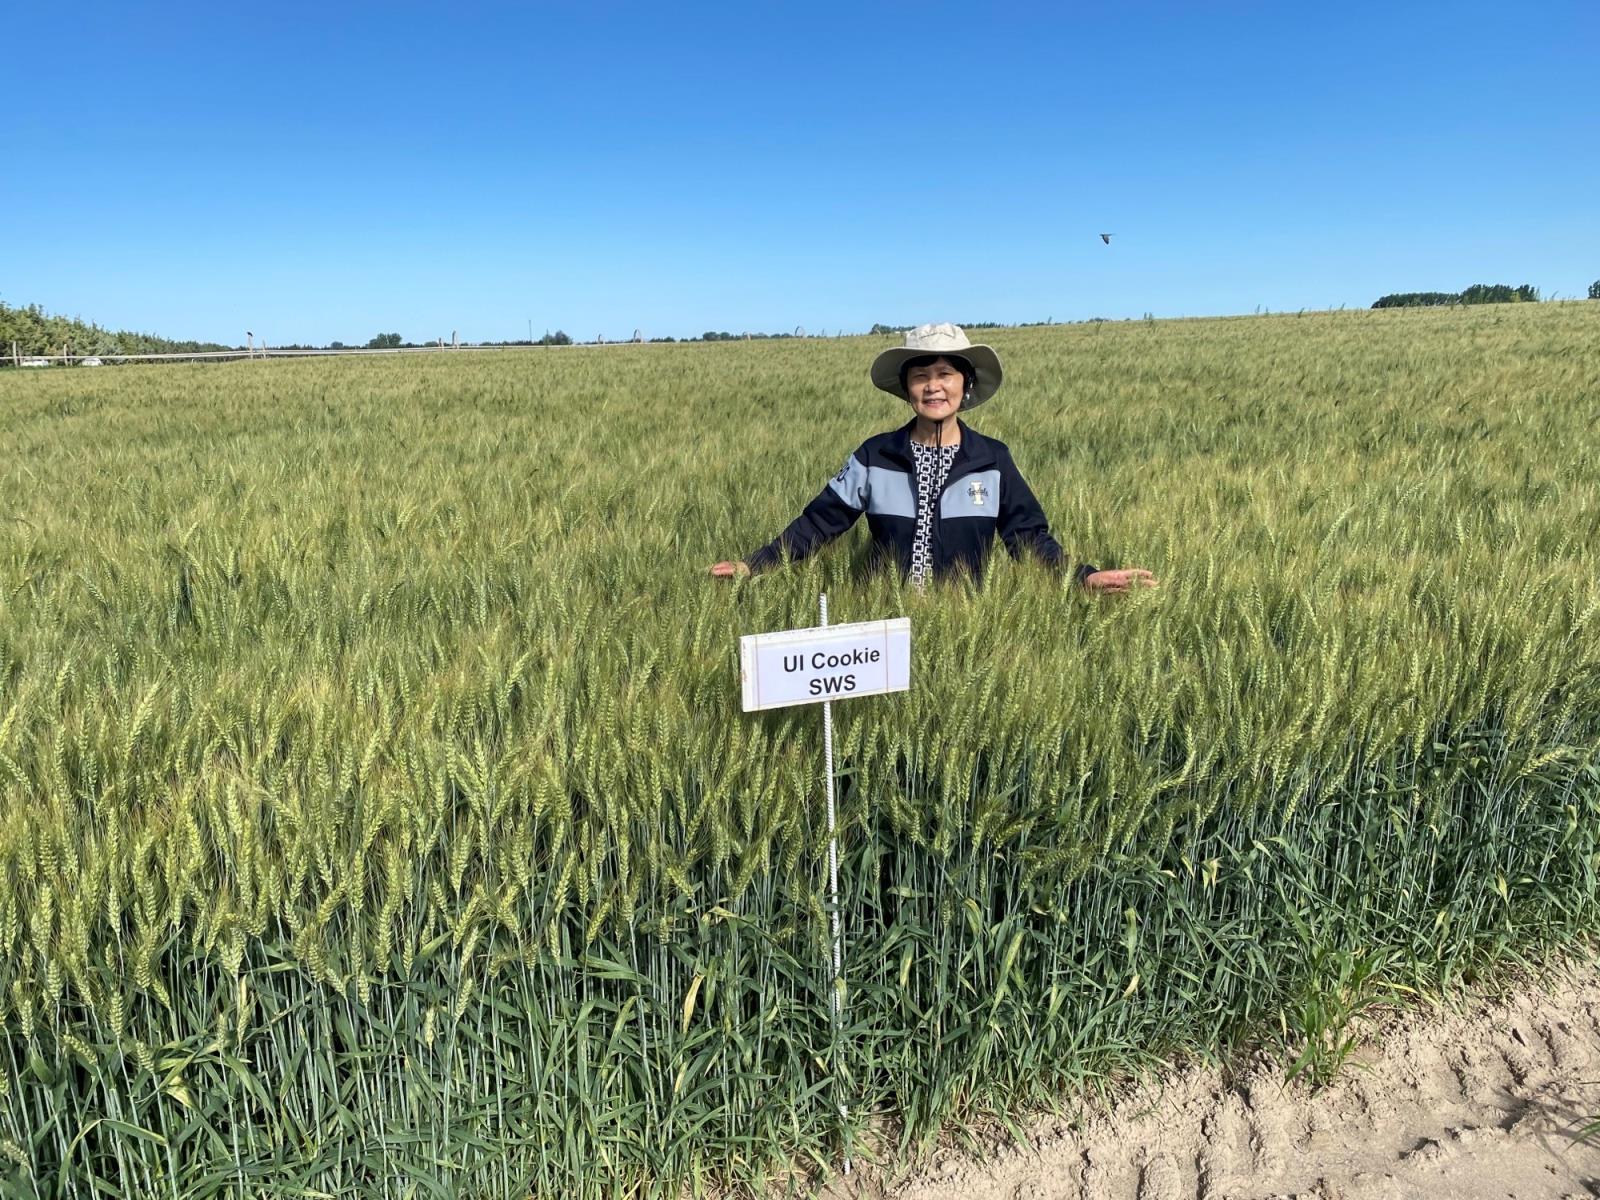 University of Idaho researcher Jianli Chen stands in a field planted to UI Cookie, a new soft white spring wheat variety that has performed well in Idaho trials. Chen developed the new variety at the UI Research and Extension wheat breeding center in Aberdeen. The Idaho Wheat Commission will manage the commercial release of UI Cookie. 